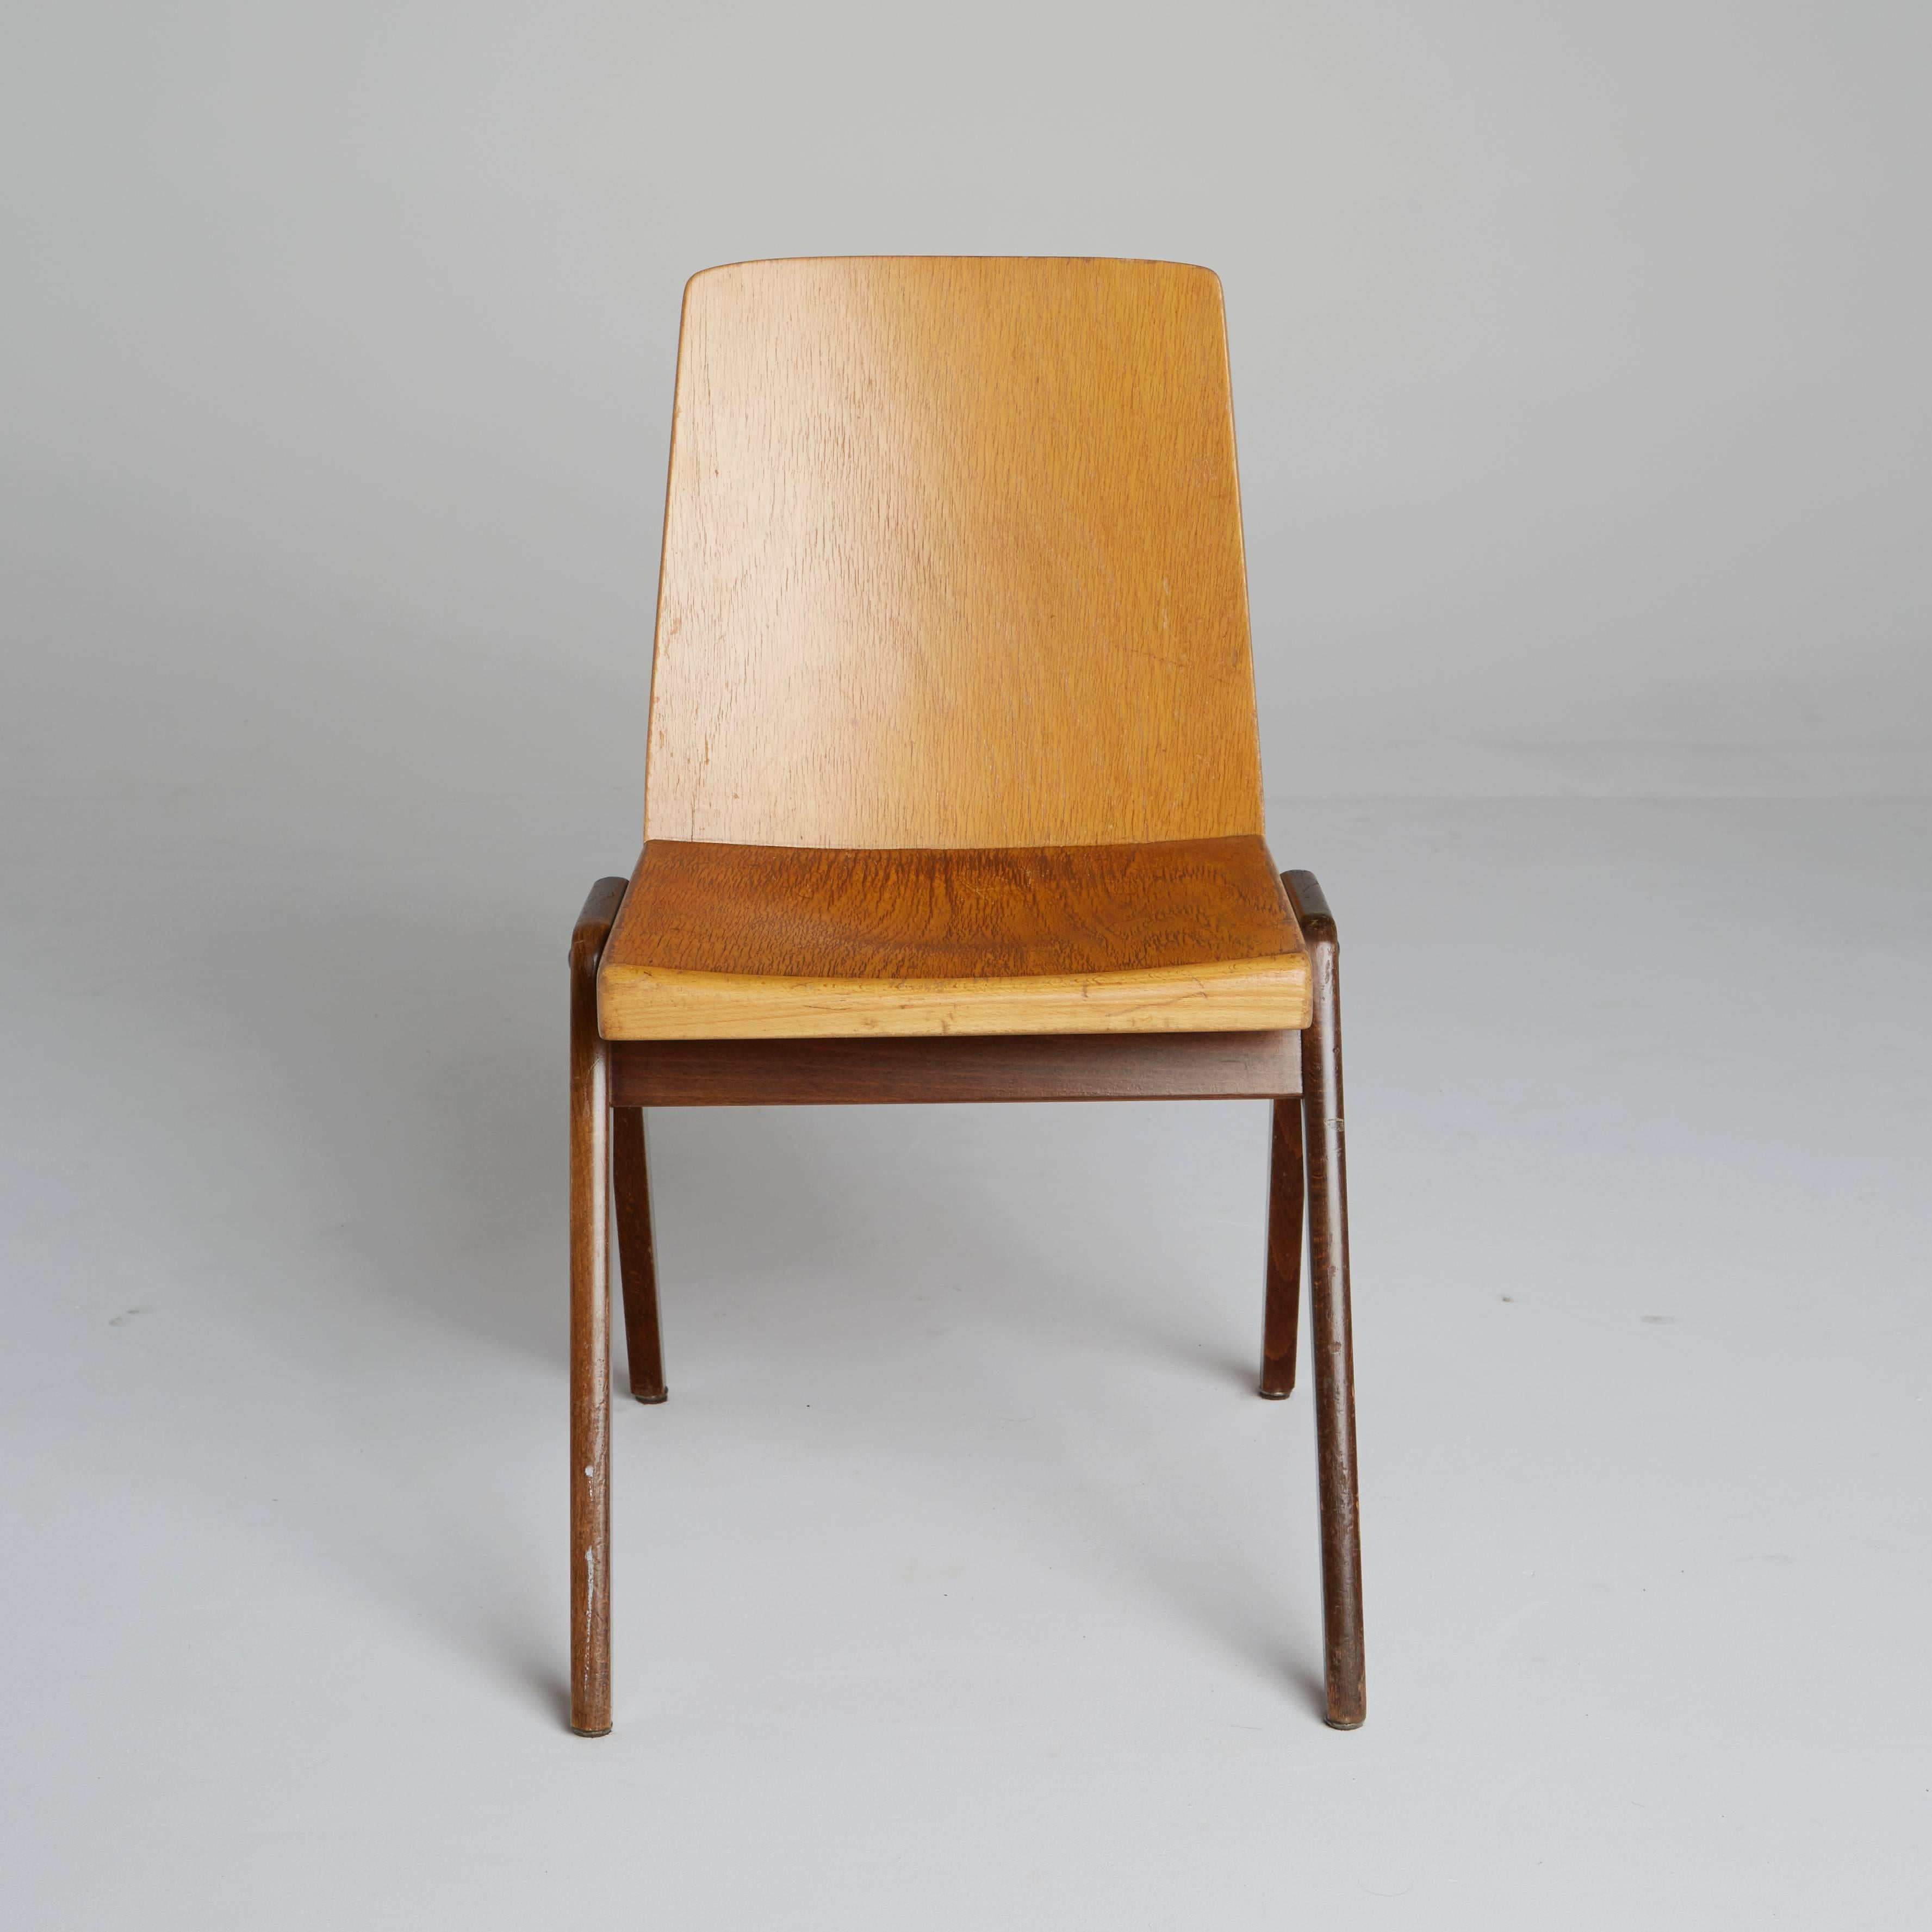 Mid-Century Modern Wooden Stacking Chairs by Thonet - ON SALE